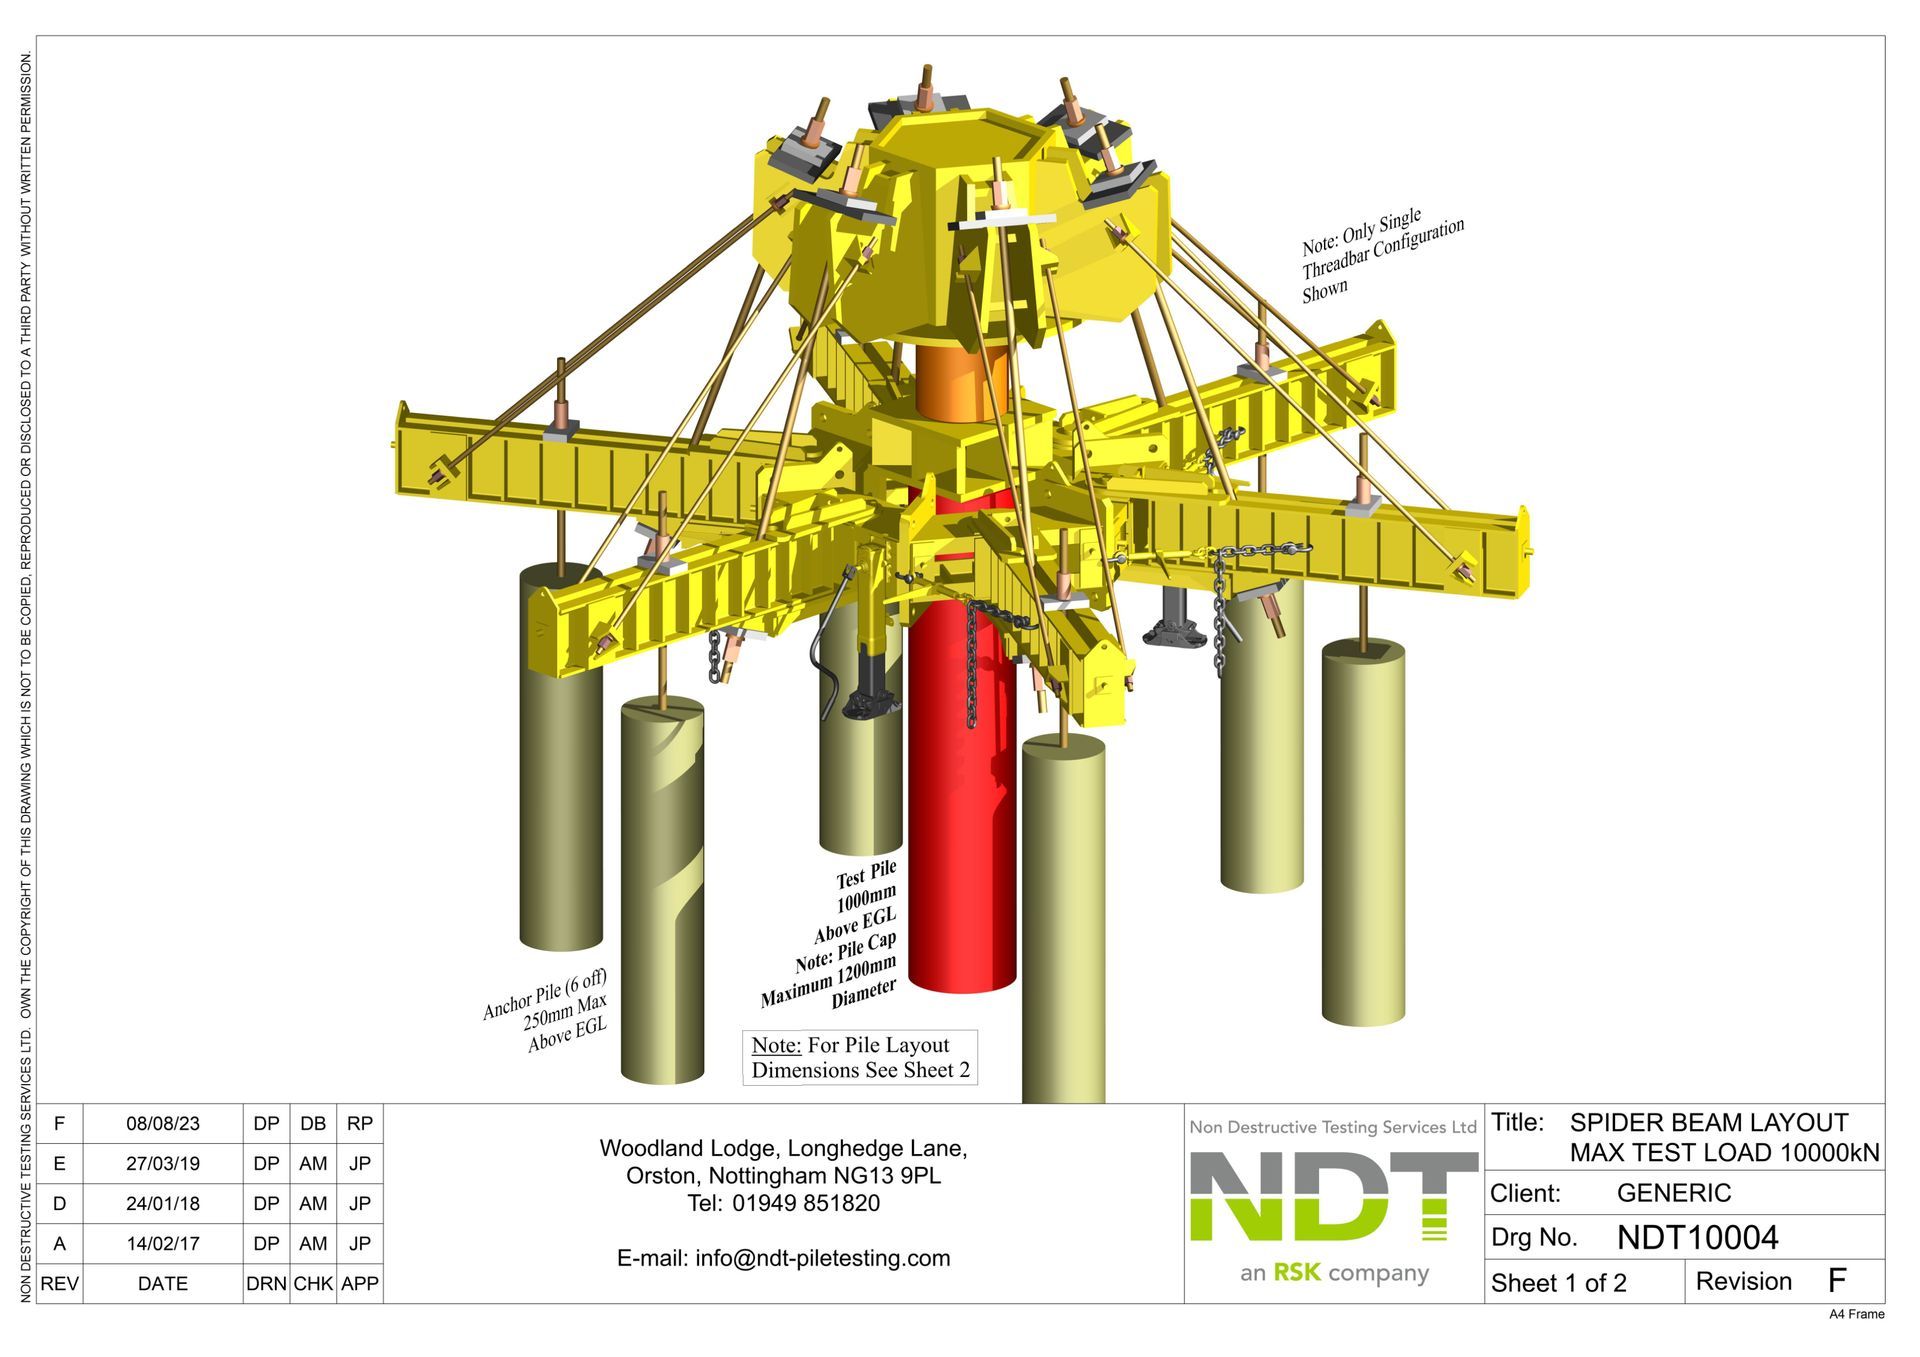 NDT00028 - 8 High Capacity Pile Layout (8000kN)